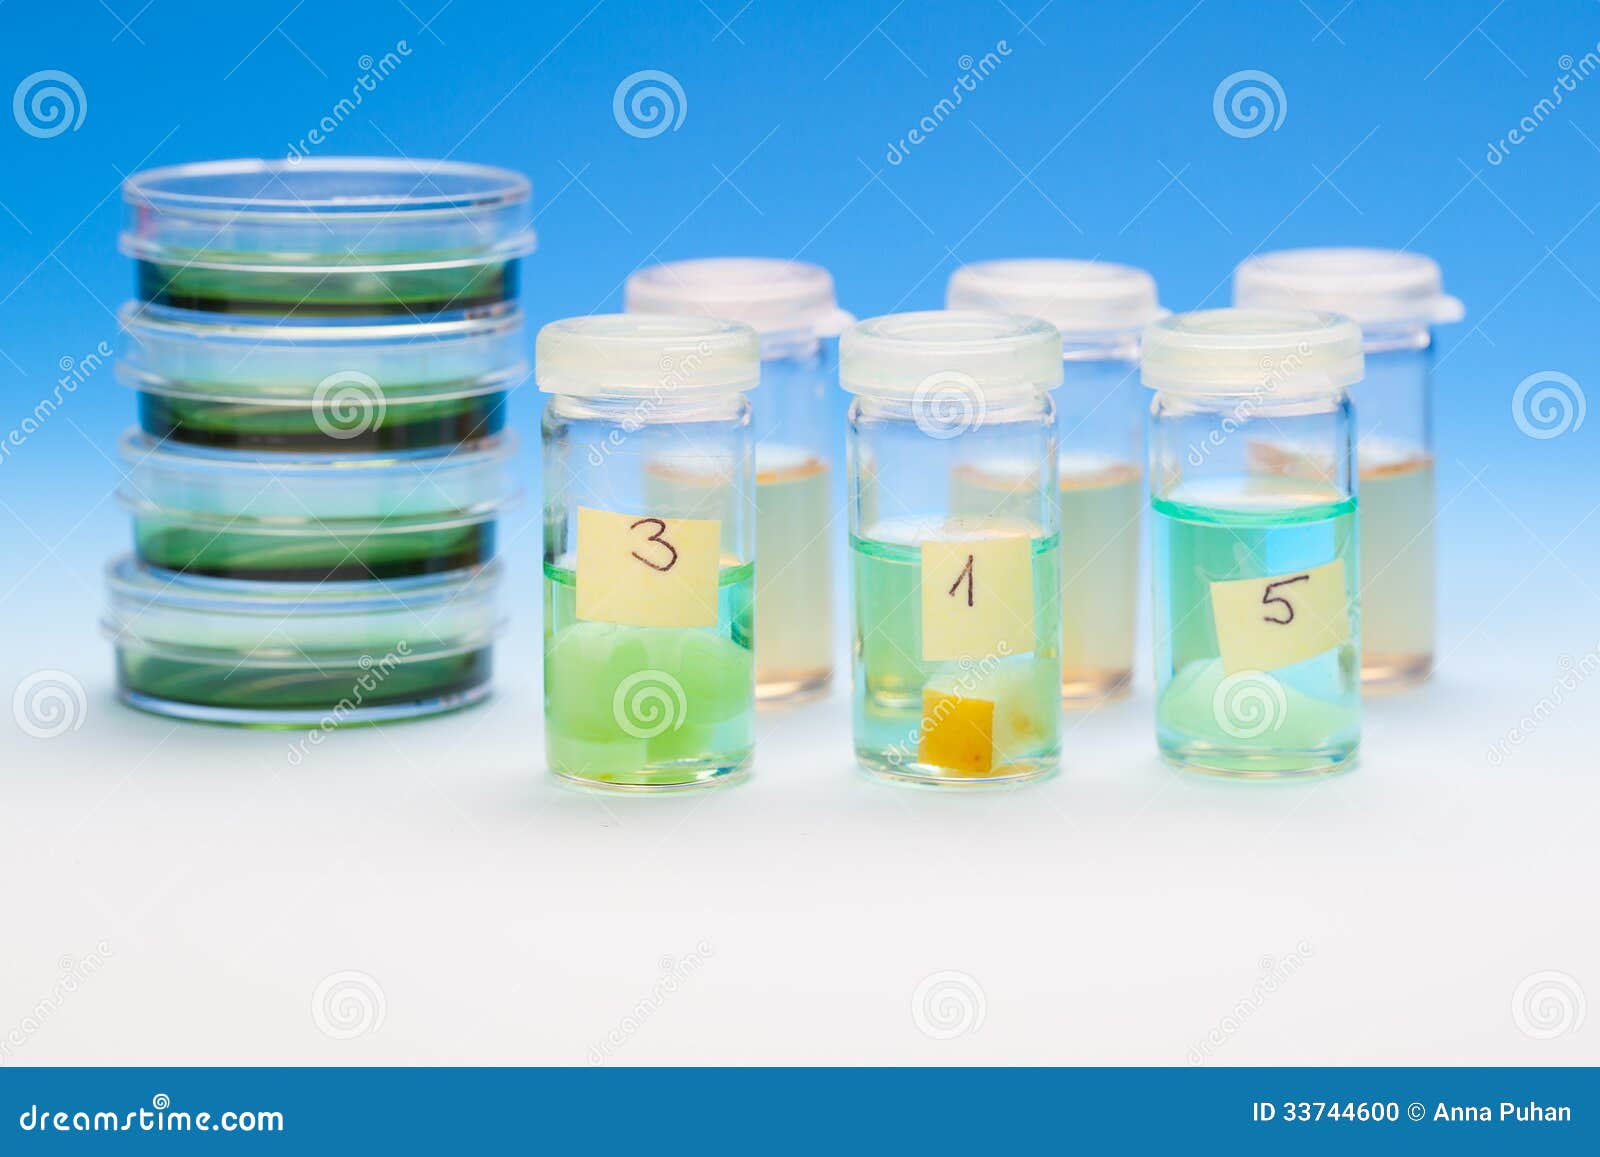 samples in plastic vials for microscopy and biopsy tissue.